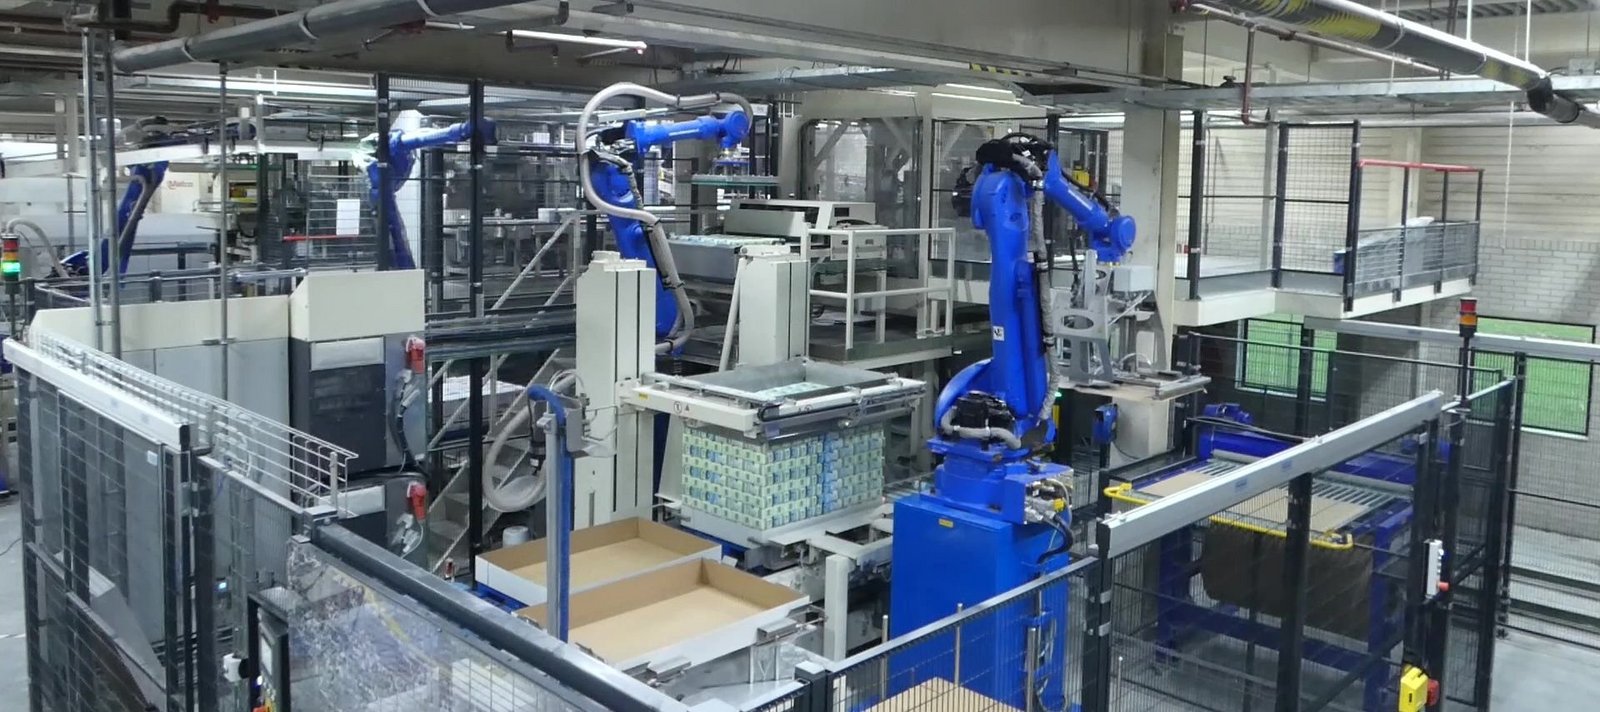 Yaskawa-Robertpack-robots-for-palletising-packages-with-sugar